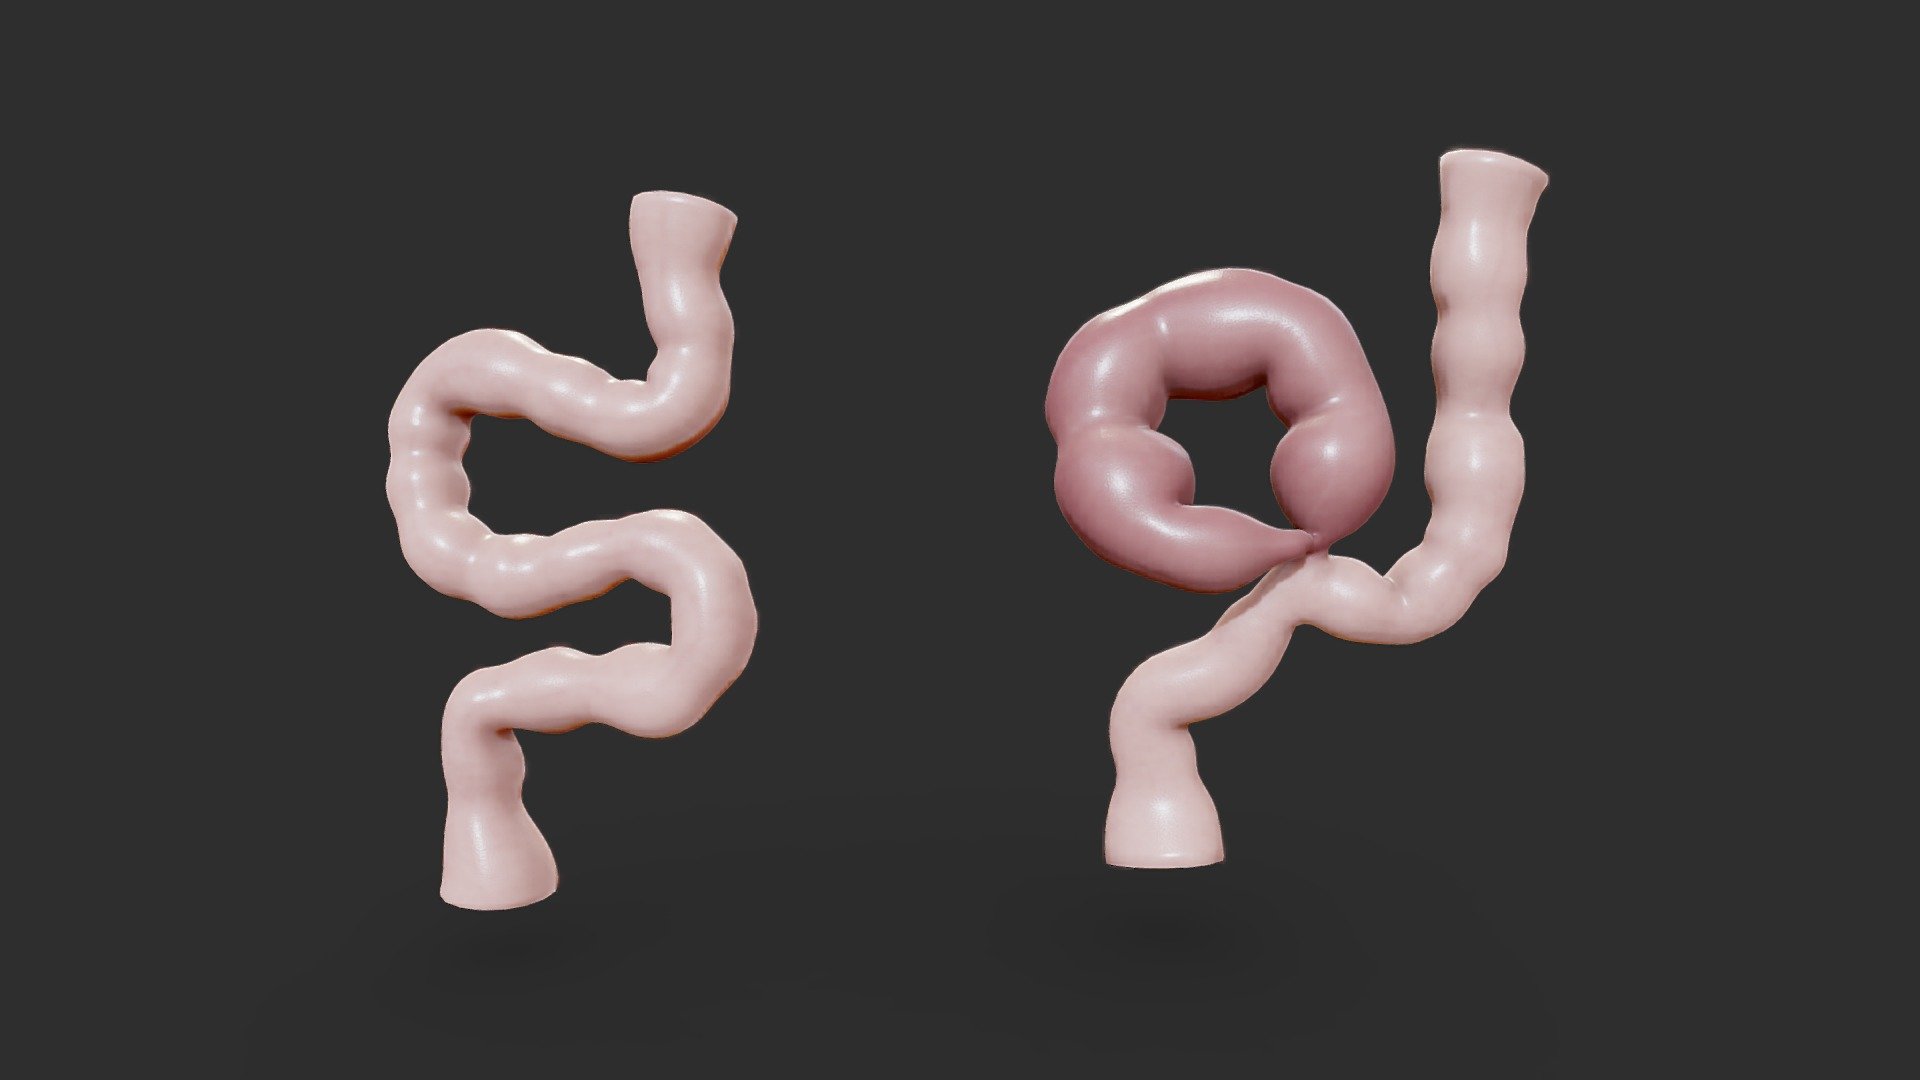 Volvulus of the Colon

A volvulus is when a loop of intestine twists around itself and the mesentery that supports it, resulting in a bowel obstruction. Symptoms include abdominal pain, abdominal bloating, vomiting, constipation, and bloody stool.




Format: FBX, OBJ, MTL, glb, glft, STL, Blender v3.4.1

Optimized UVs (Non-Overlapping UVs)

Two separate formats for textures (4k) (PBR) ( Jpeg and Png)

Base Color (Albedo)

Normal Map

AO Map

Metallic Map

Roughness Map

Height Map

Render scene in Blender

 - Volvulus of the Colon - Buy Royalty Free 3D model by Nima (@h3ydari96) 3d model